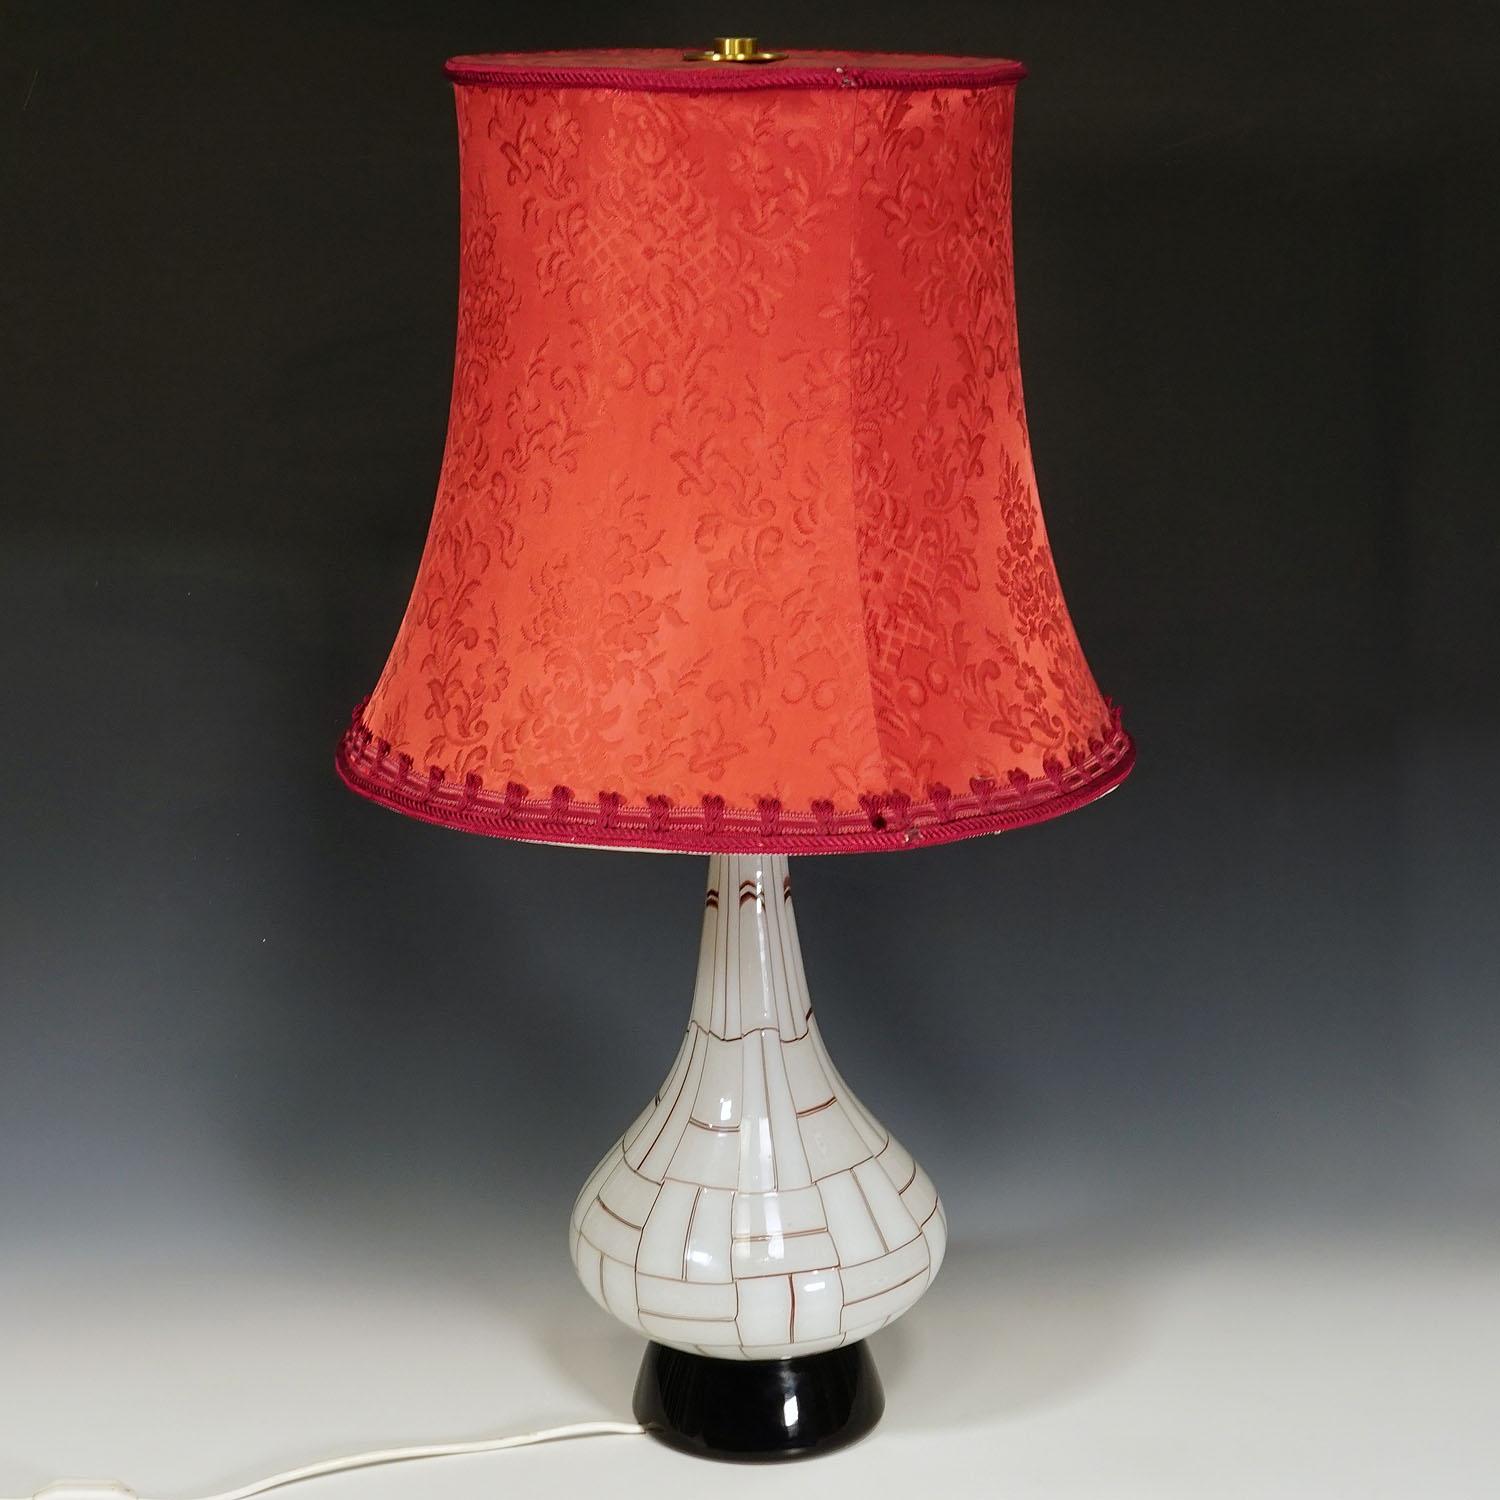 Vintage Barovier & Toso 'Sidone' Table Lamp, Murano circa 1960s

A rare table lamp of the Sidone series designed by Ercole Barovier in 1957 and manufactured by Barovier & Toso, Murano around 1960s. The Sidone series is made of melted rectangular